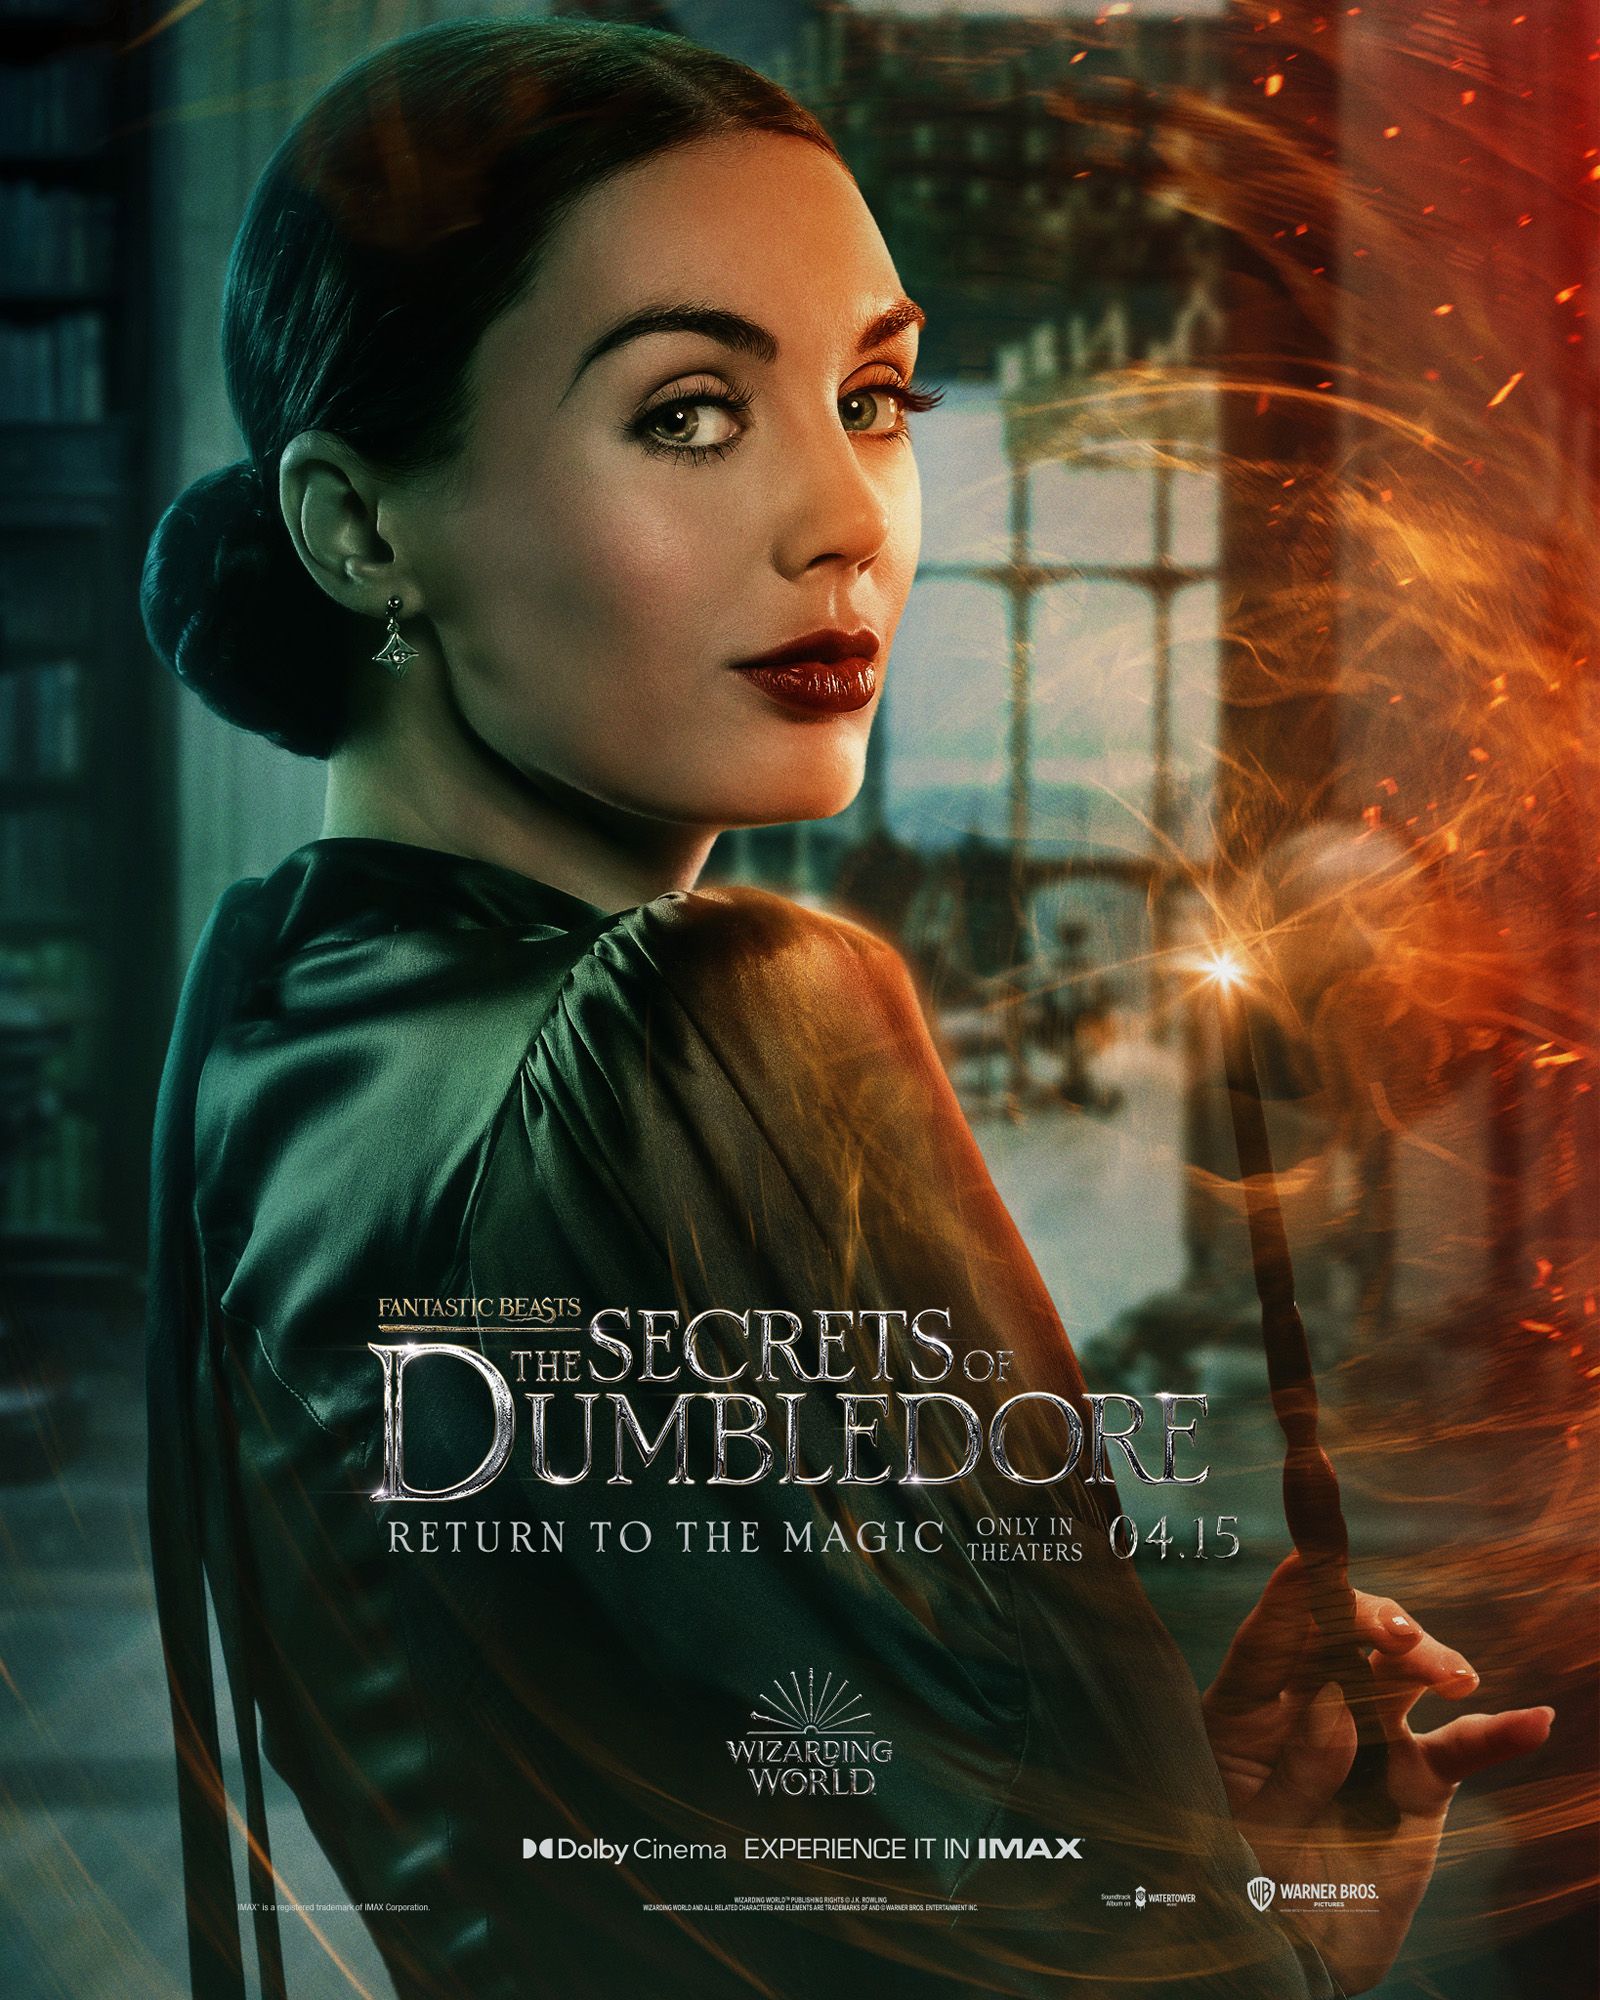 Poppy Corby-Tuech Fantastic Beasts 3 Poster